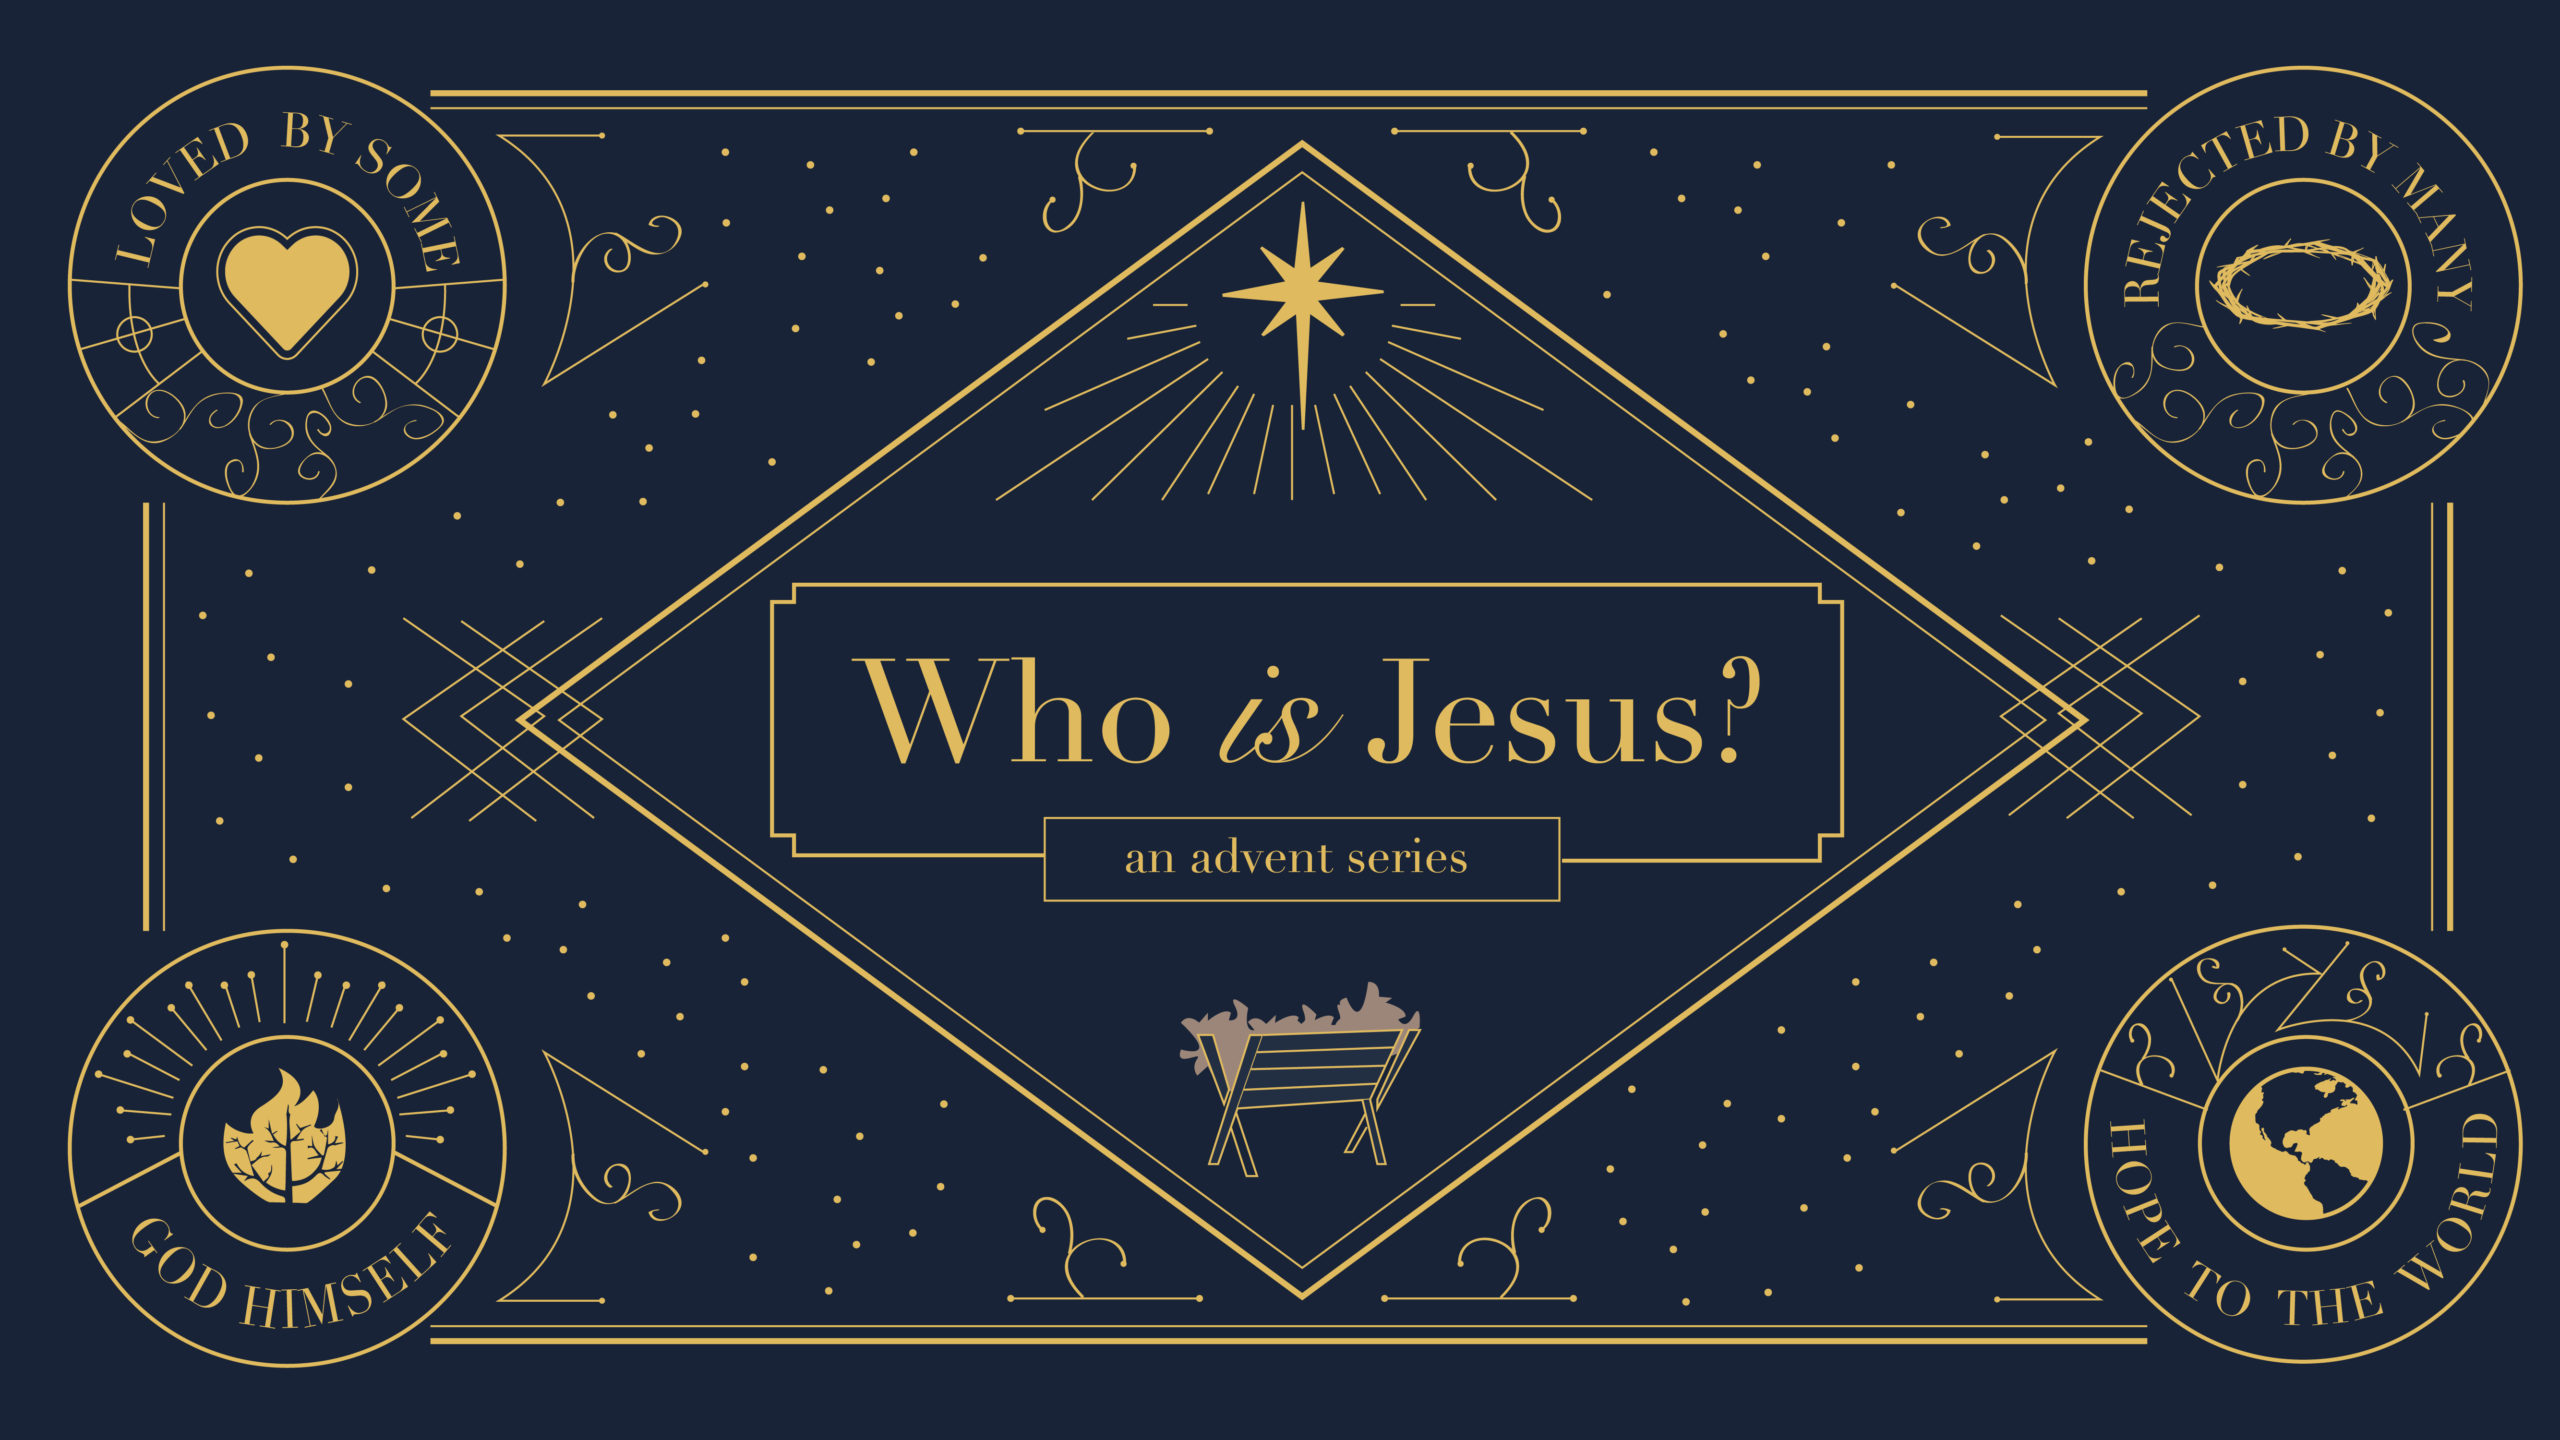 Who is Jesus? He is Rejected by Many